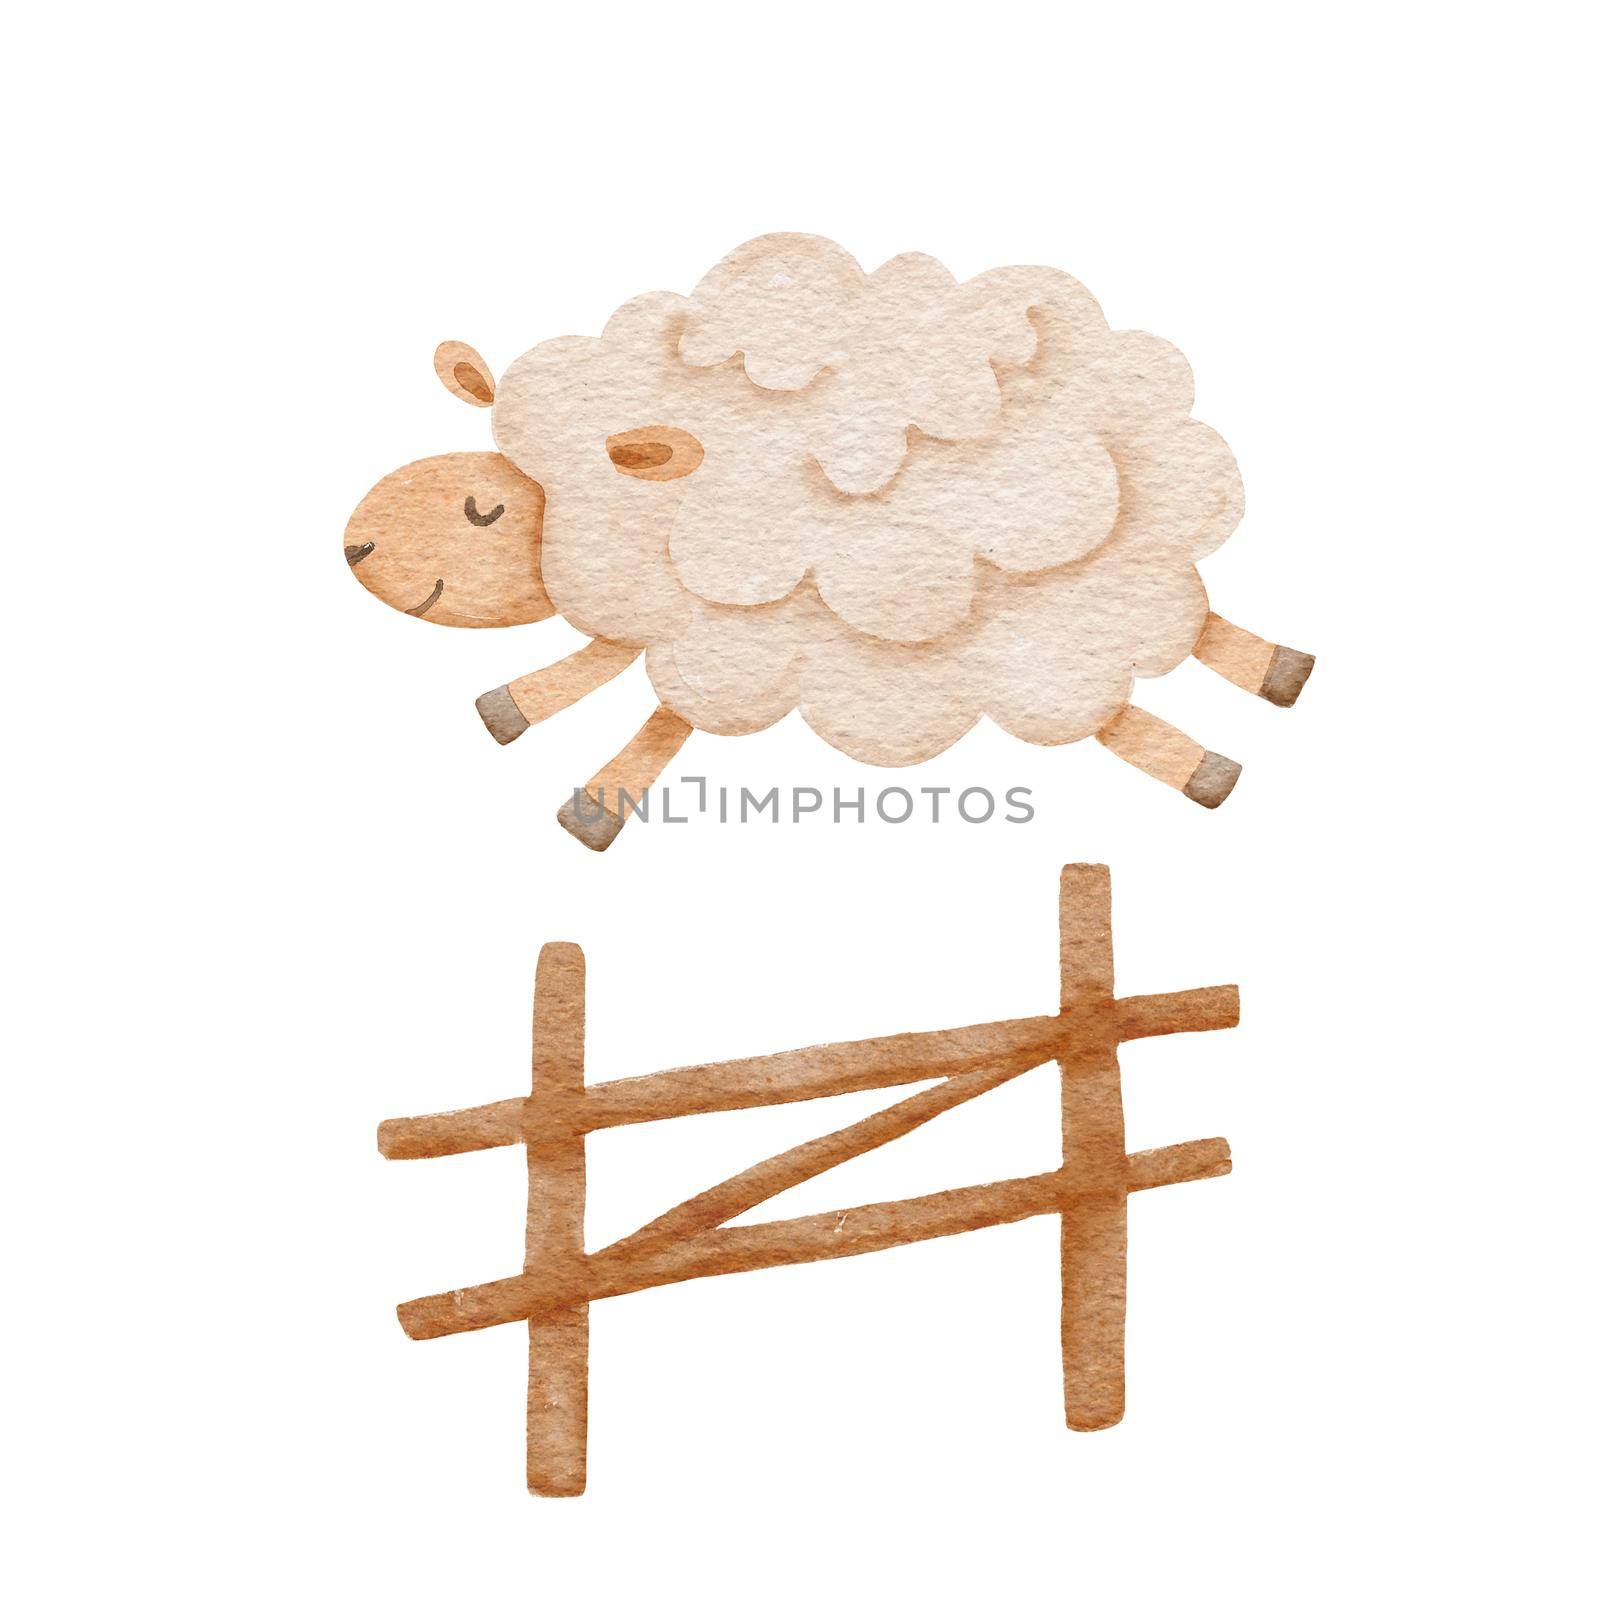 Cute cartoon sheep jumping over fence. Counting sheep to fall asleep. Good night sleep metaphor poster. waterolor illustration isolated on white.